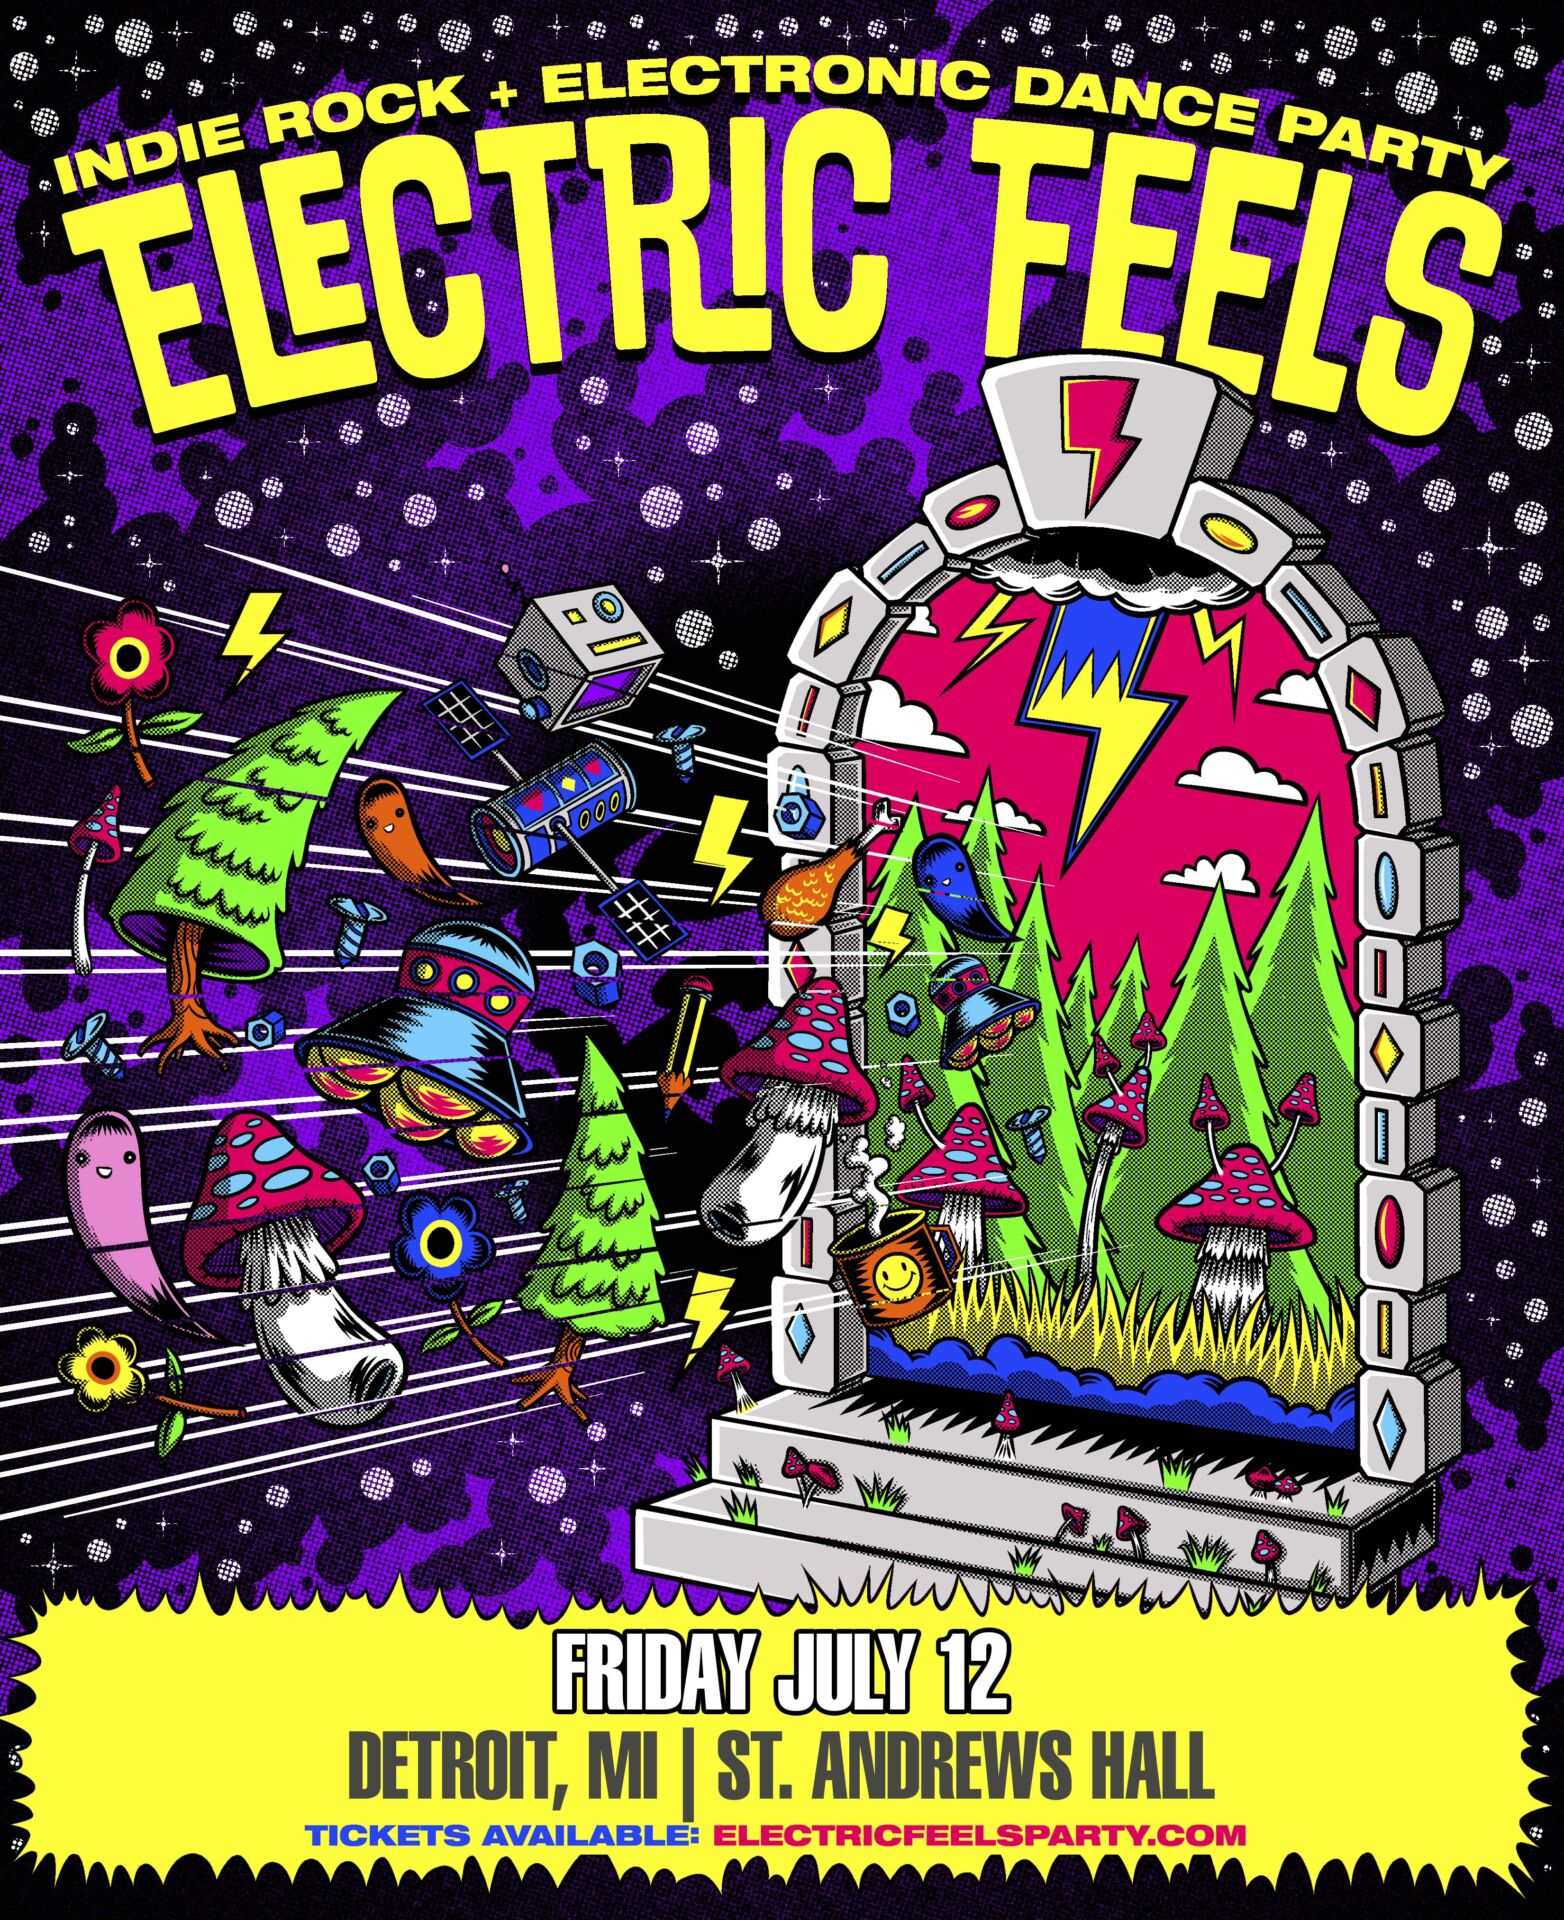 Electric Feels at St. Andrews Hall